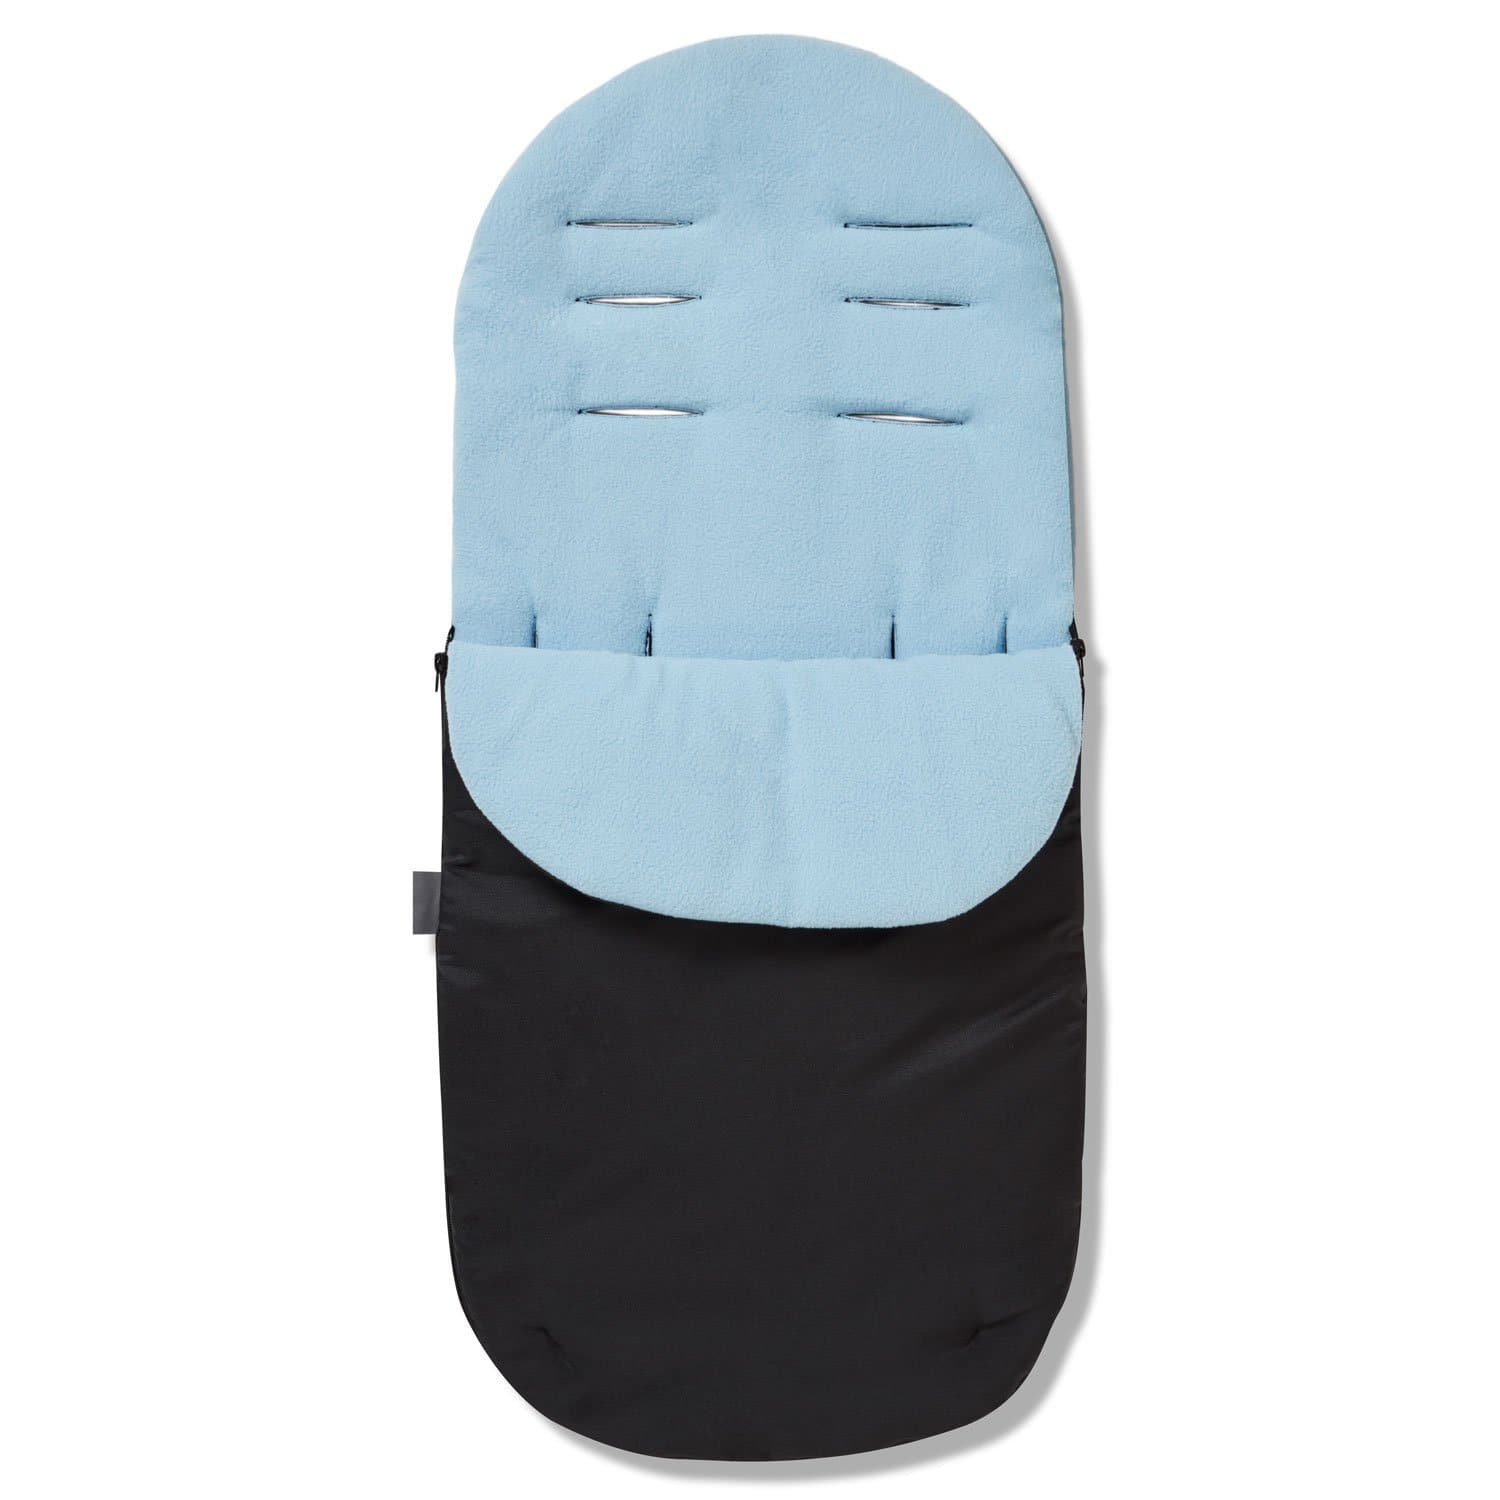 Footmuff / Cosy Toes Compatible with BabyCare - For Your Little One